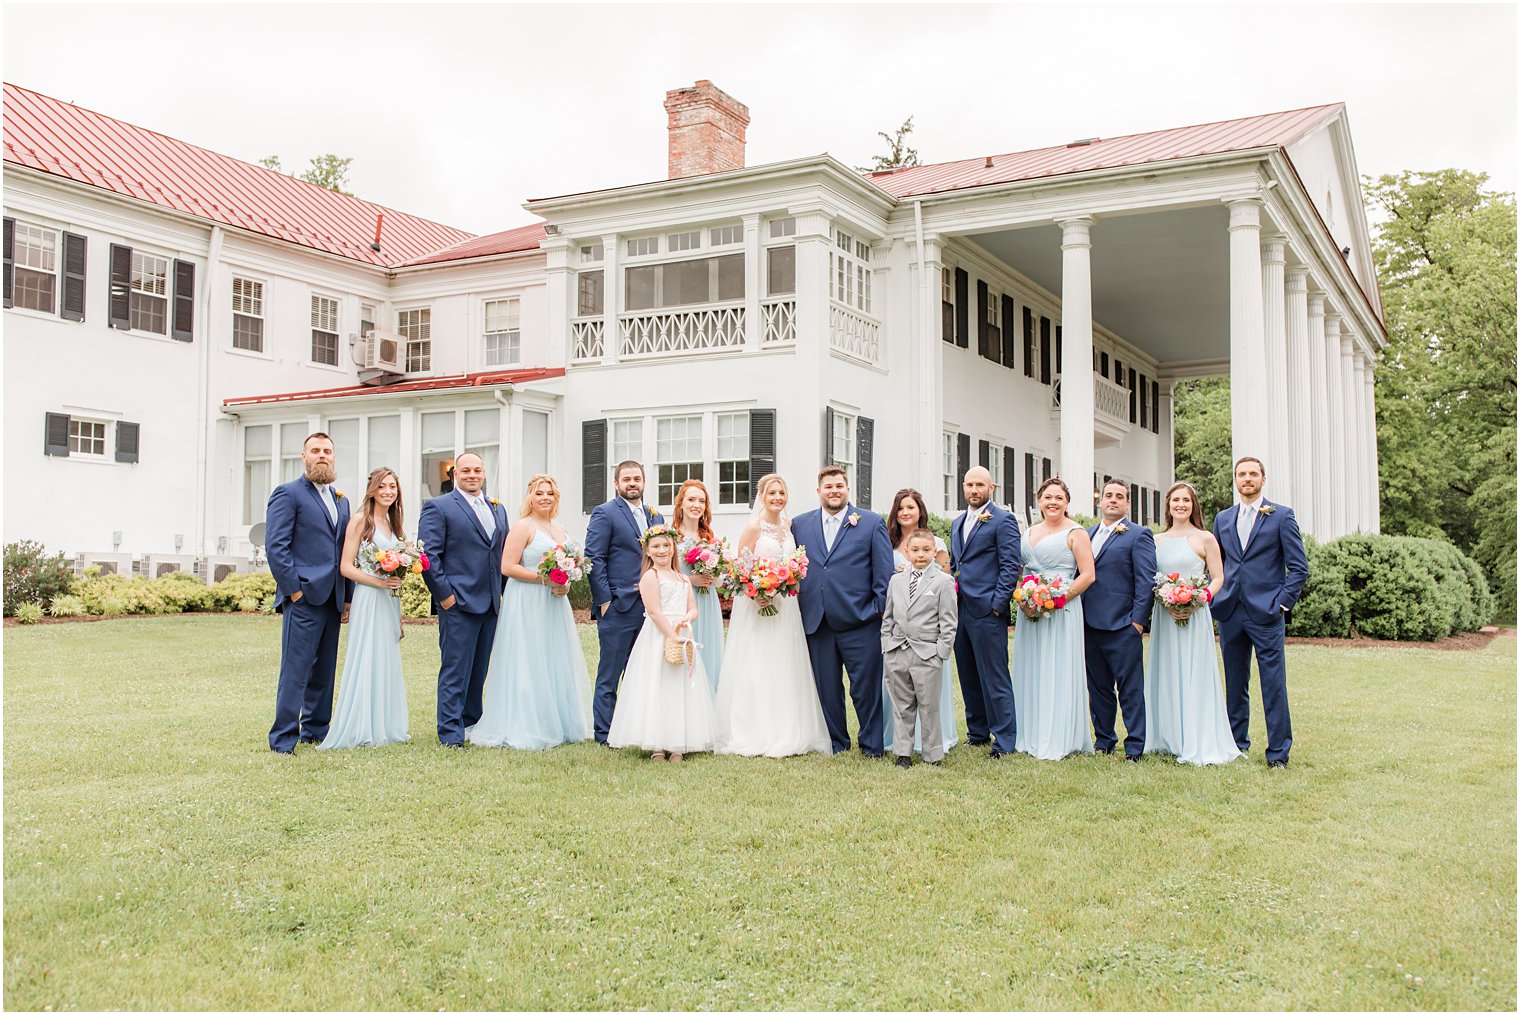 newlyweds pose with bridal party in light blue dresses and navy suits 